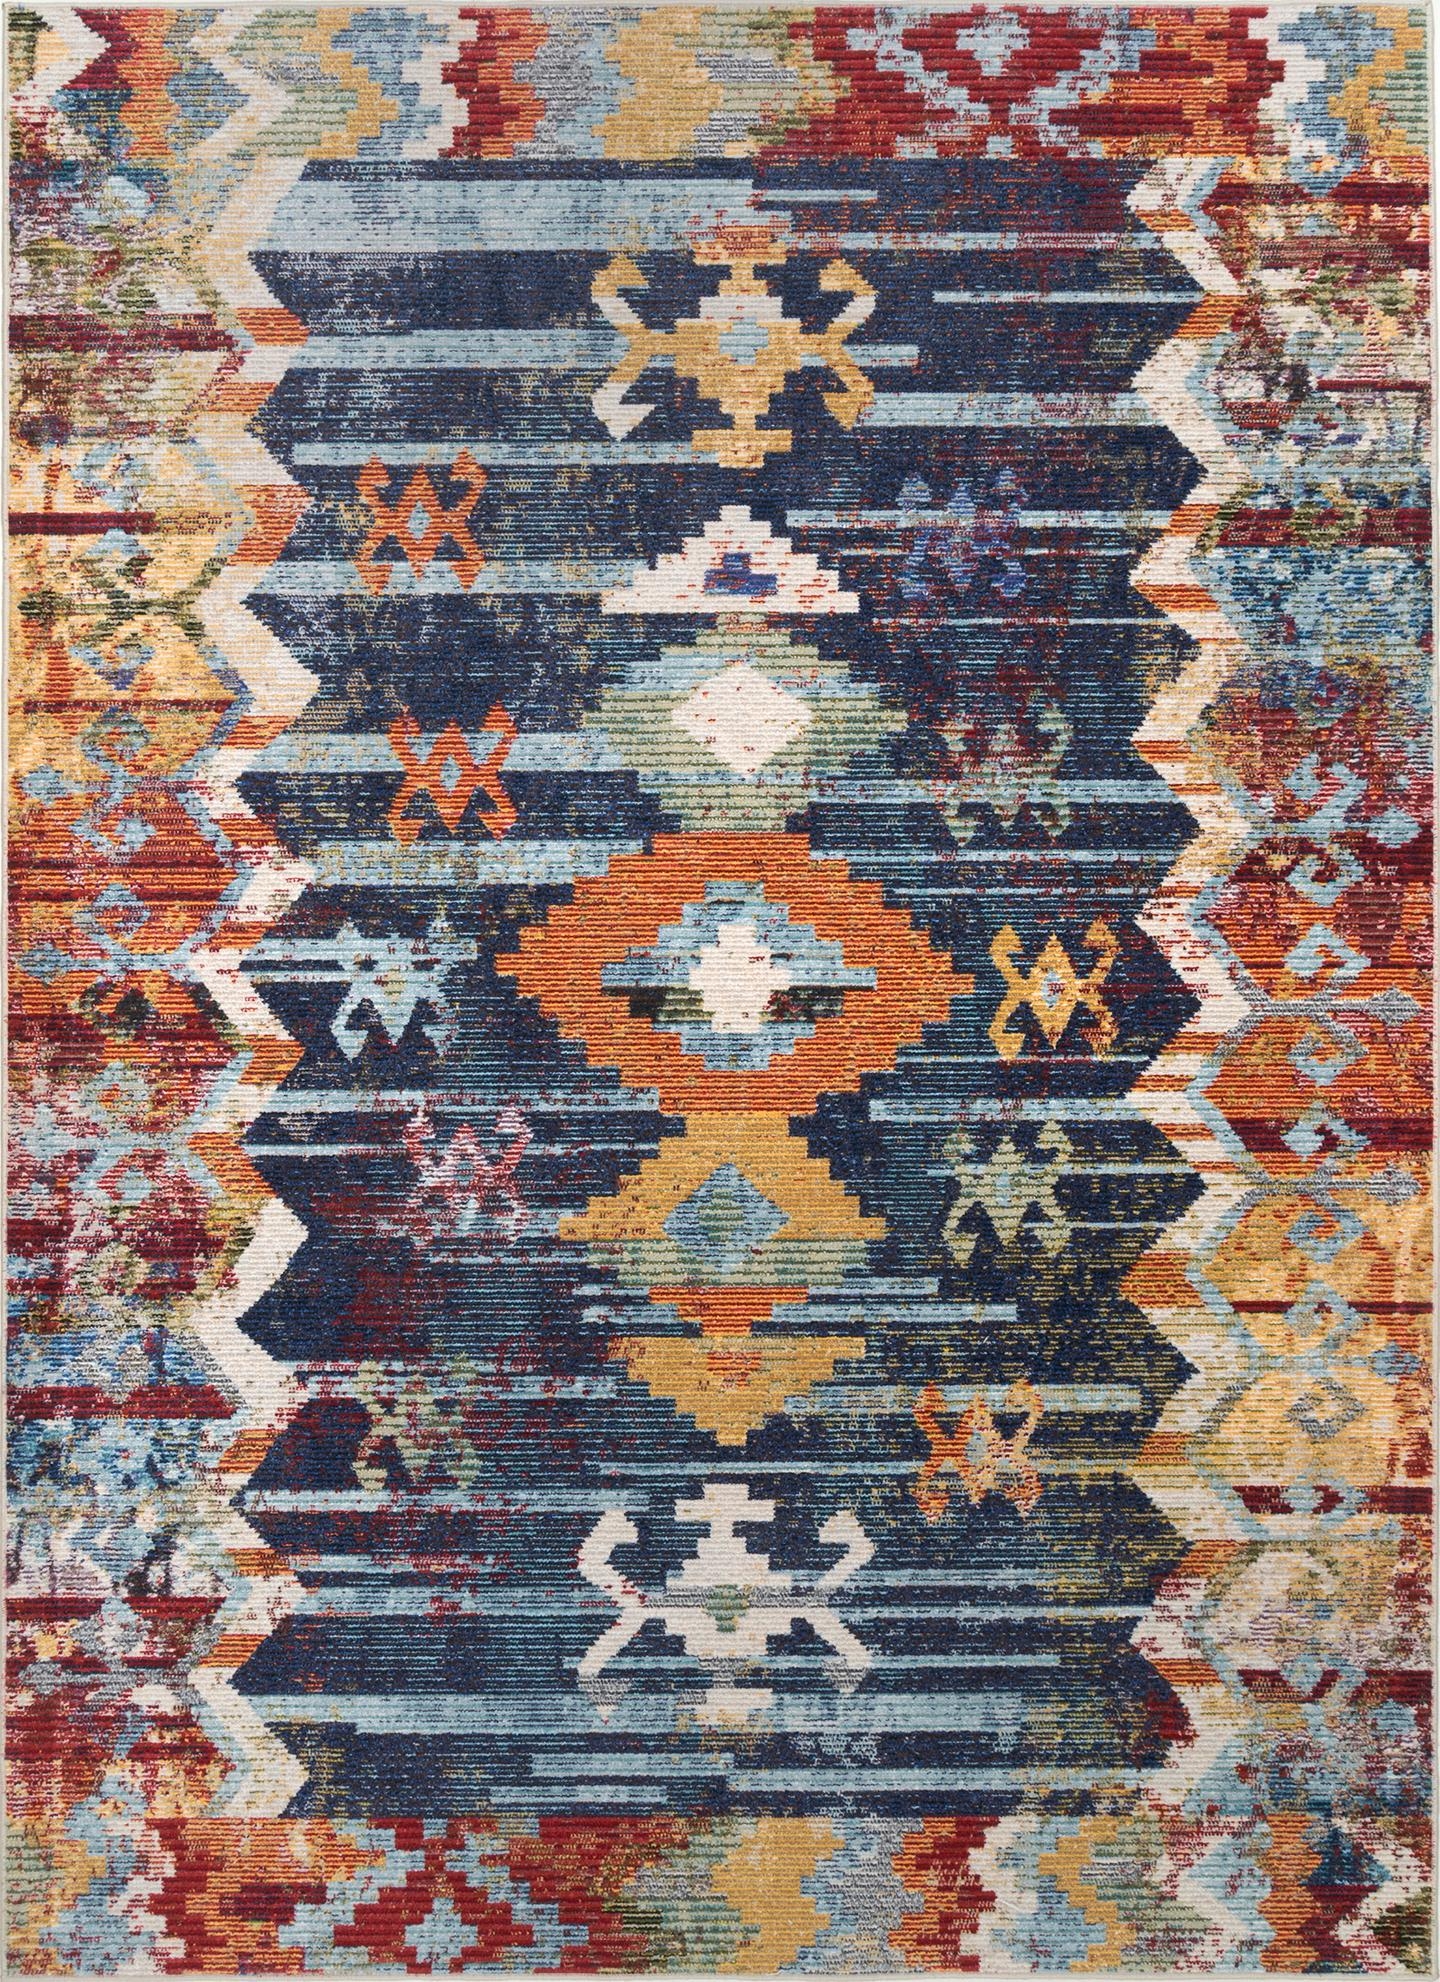 Vintage Abstract Osteen Rug Area Rug - Image 1